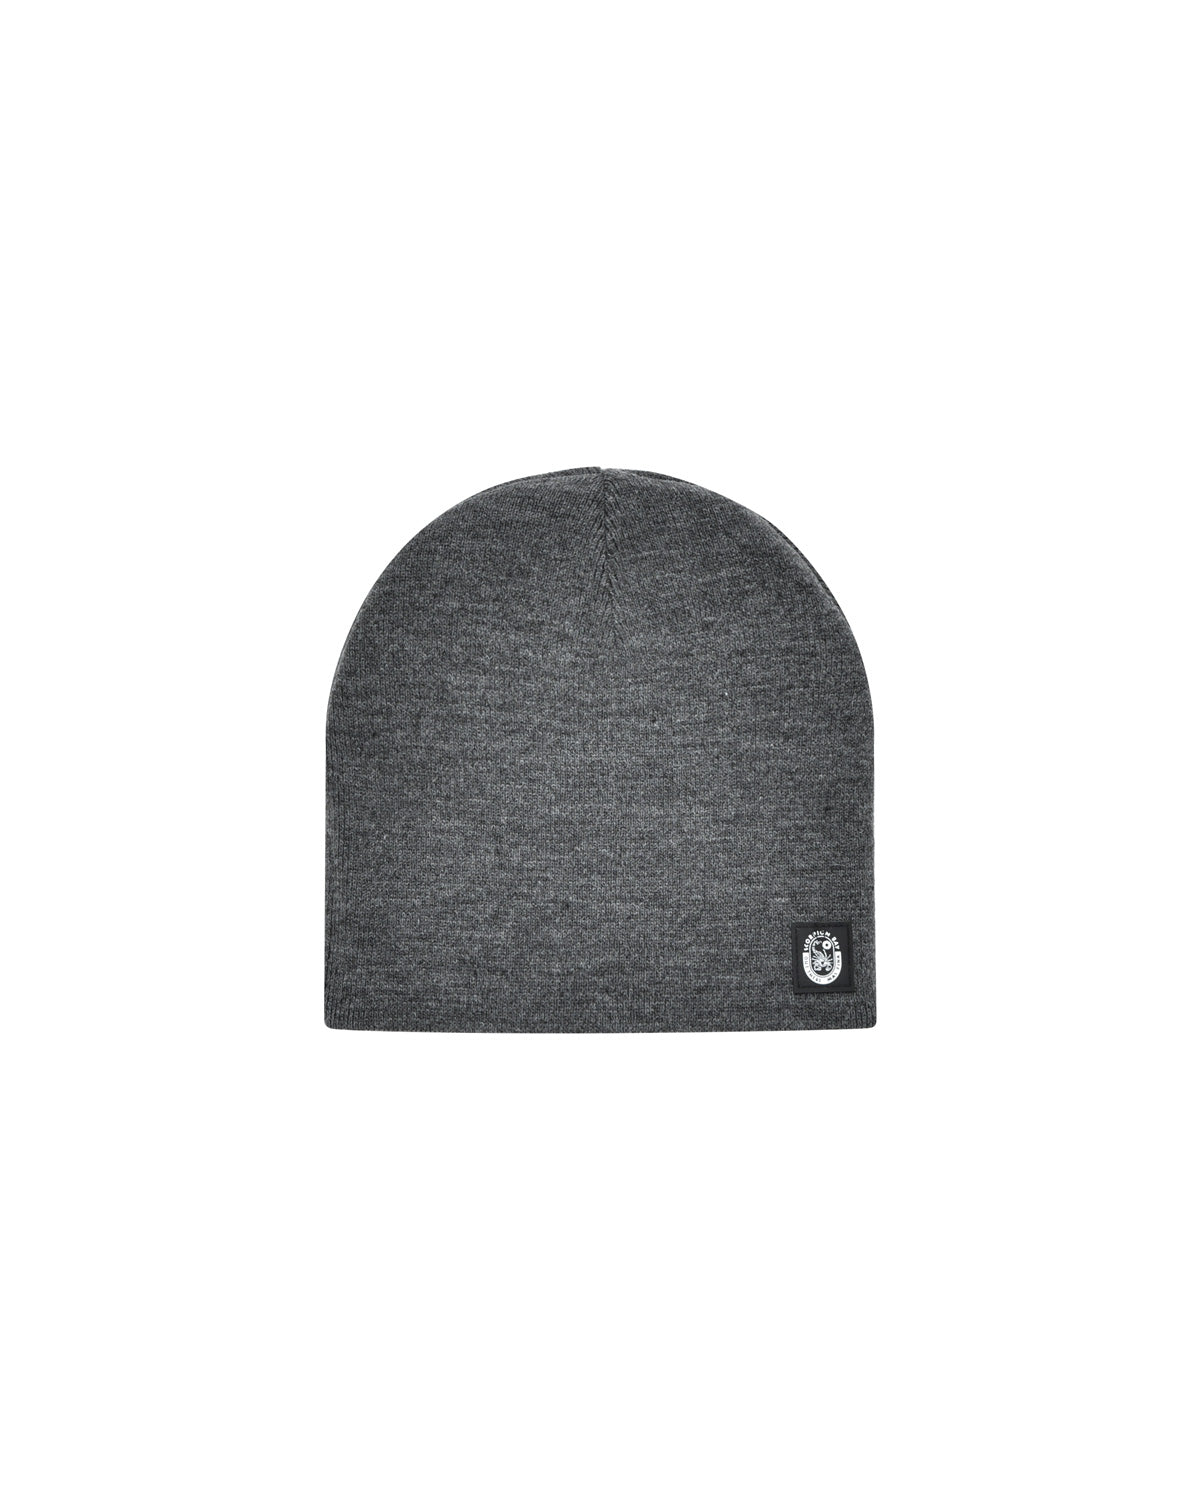 Doubleface Ritual Gray Knitted Beanie